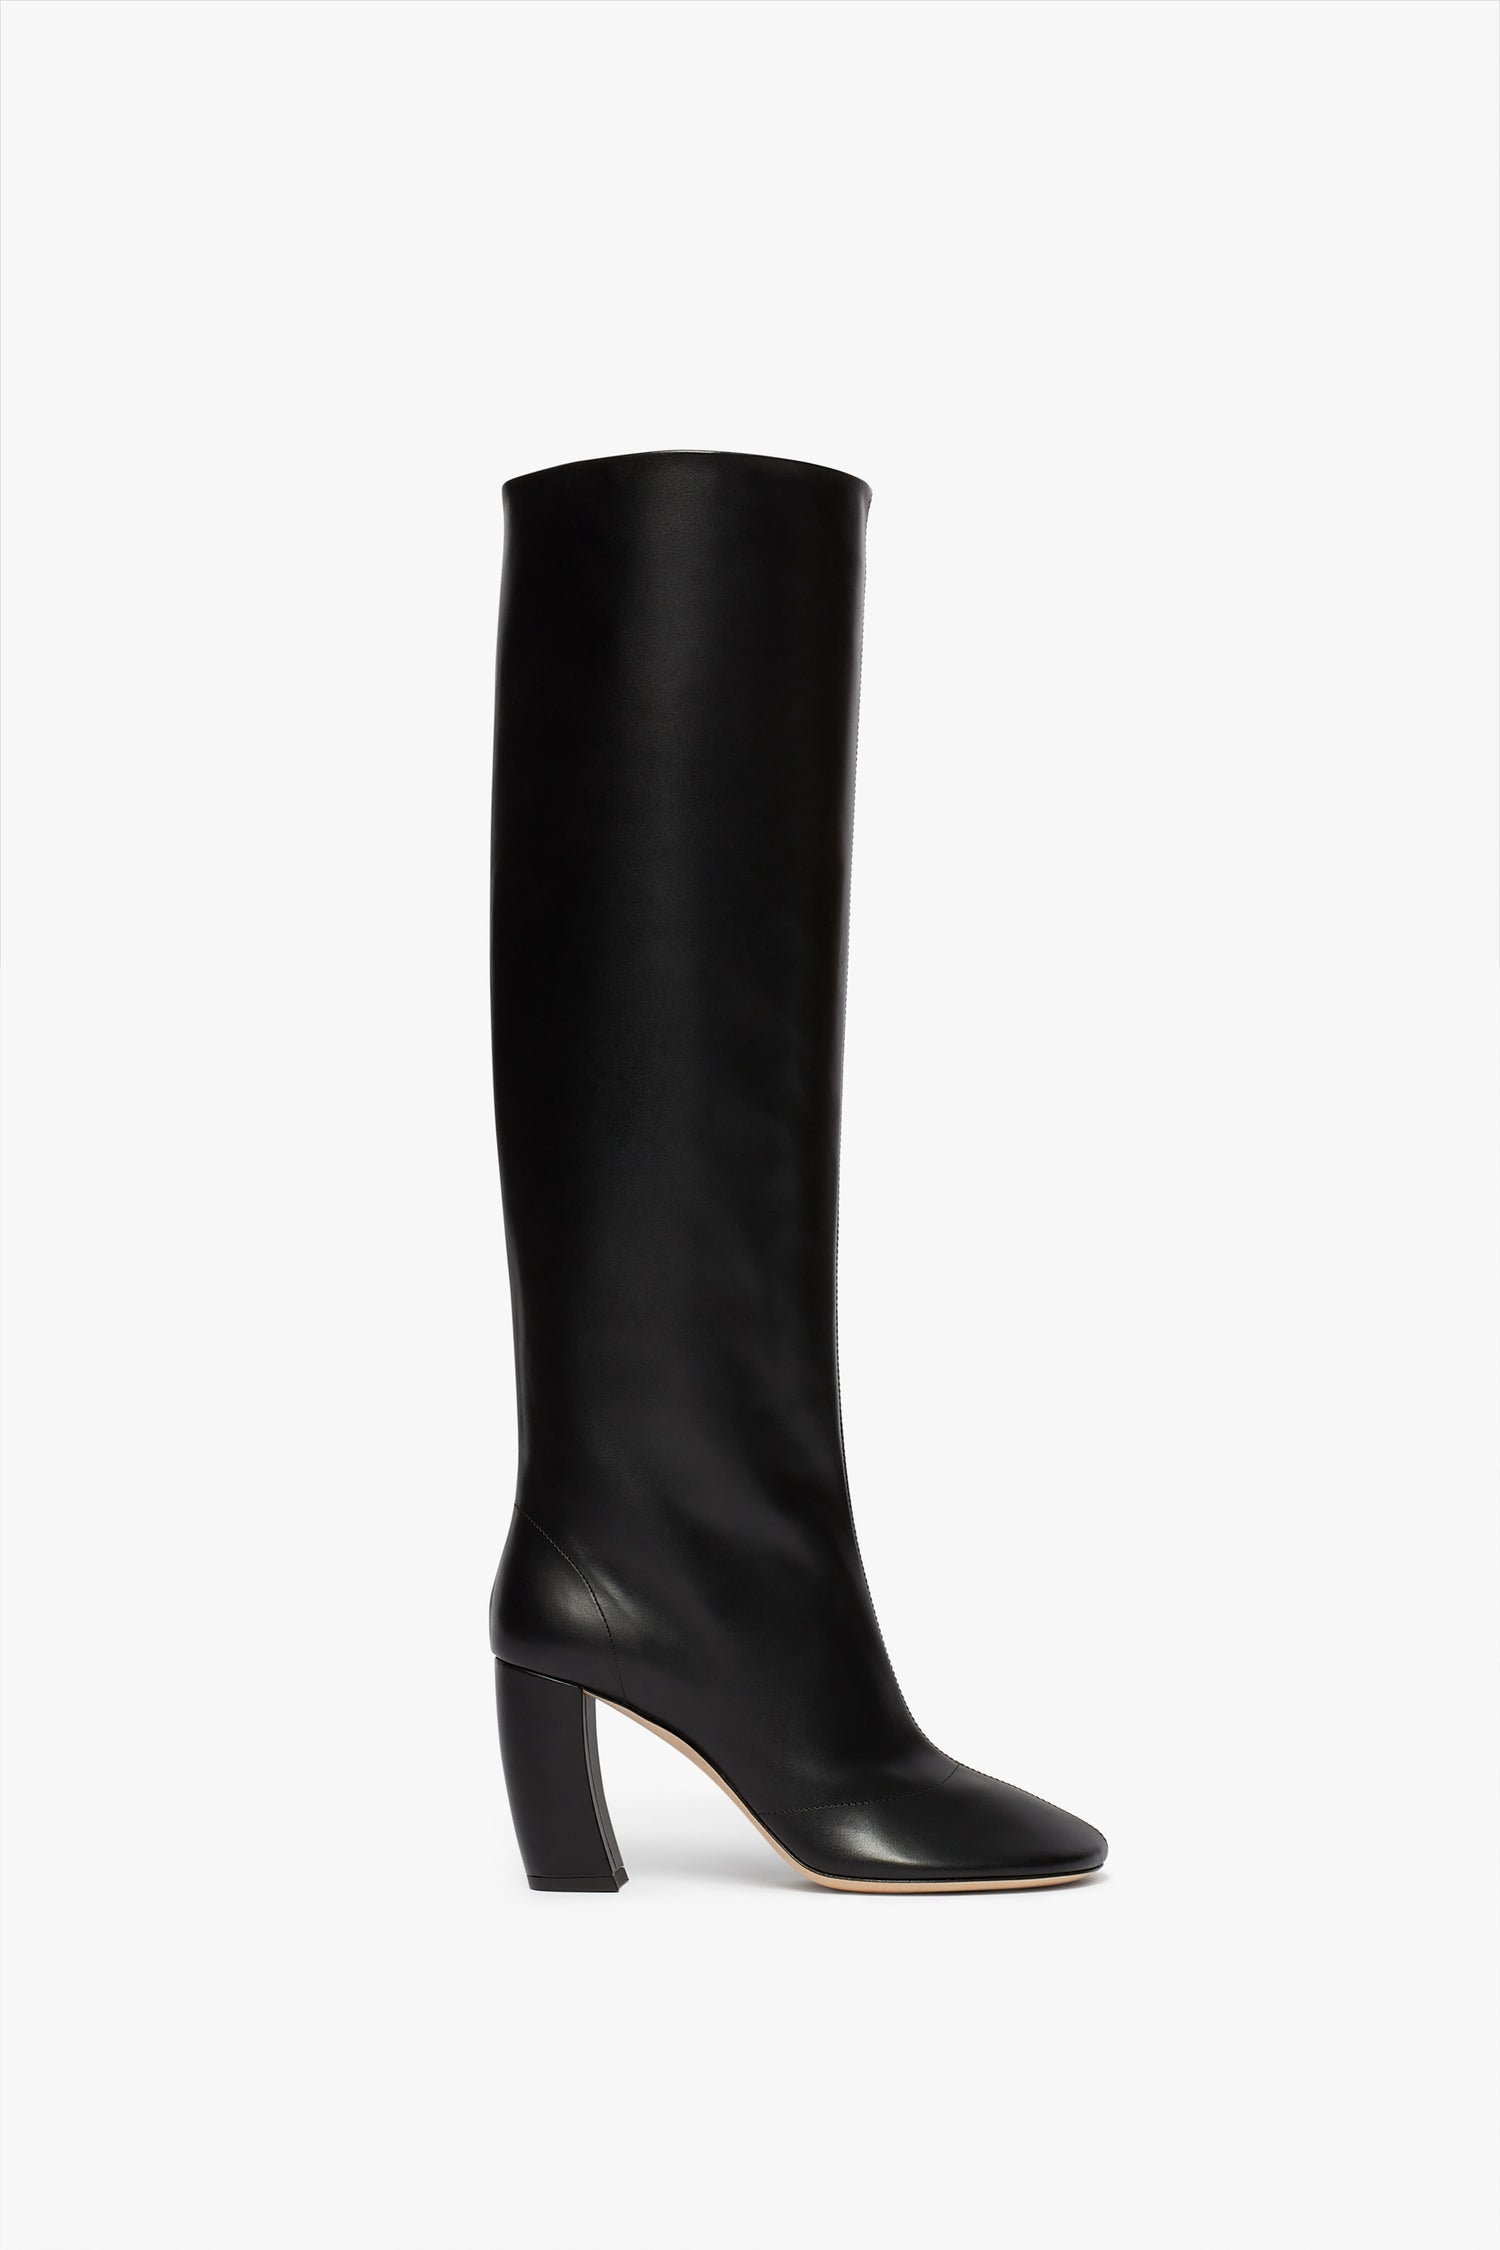 A single **Capri Rise Boot 115mm in Black**, by **Victoria Beckham**, in black calf leather, featuring a knee-high design with a rounded toe and an angular 115mm heel, isolated on a white background.